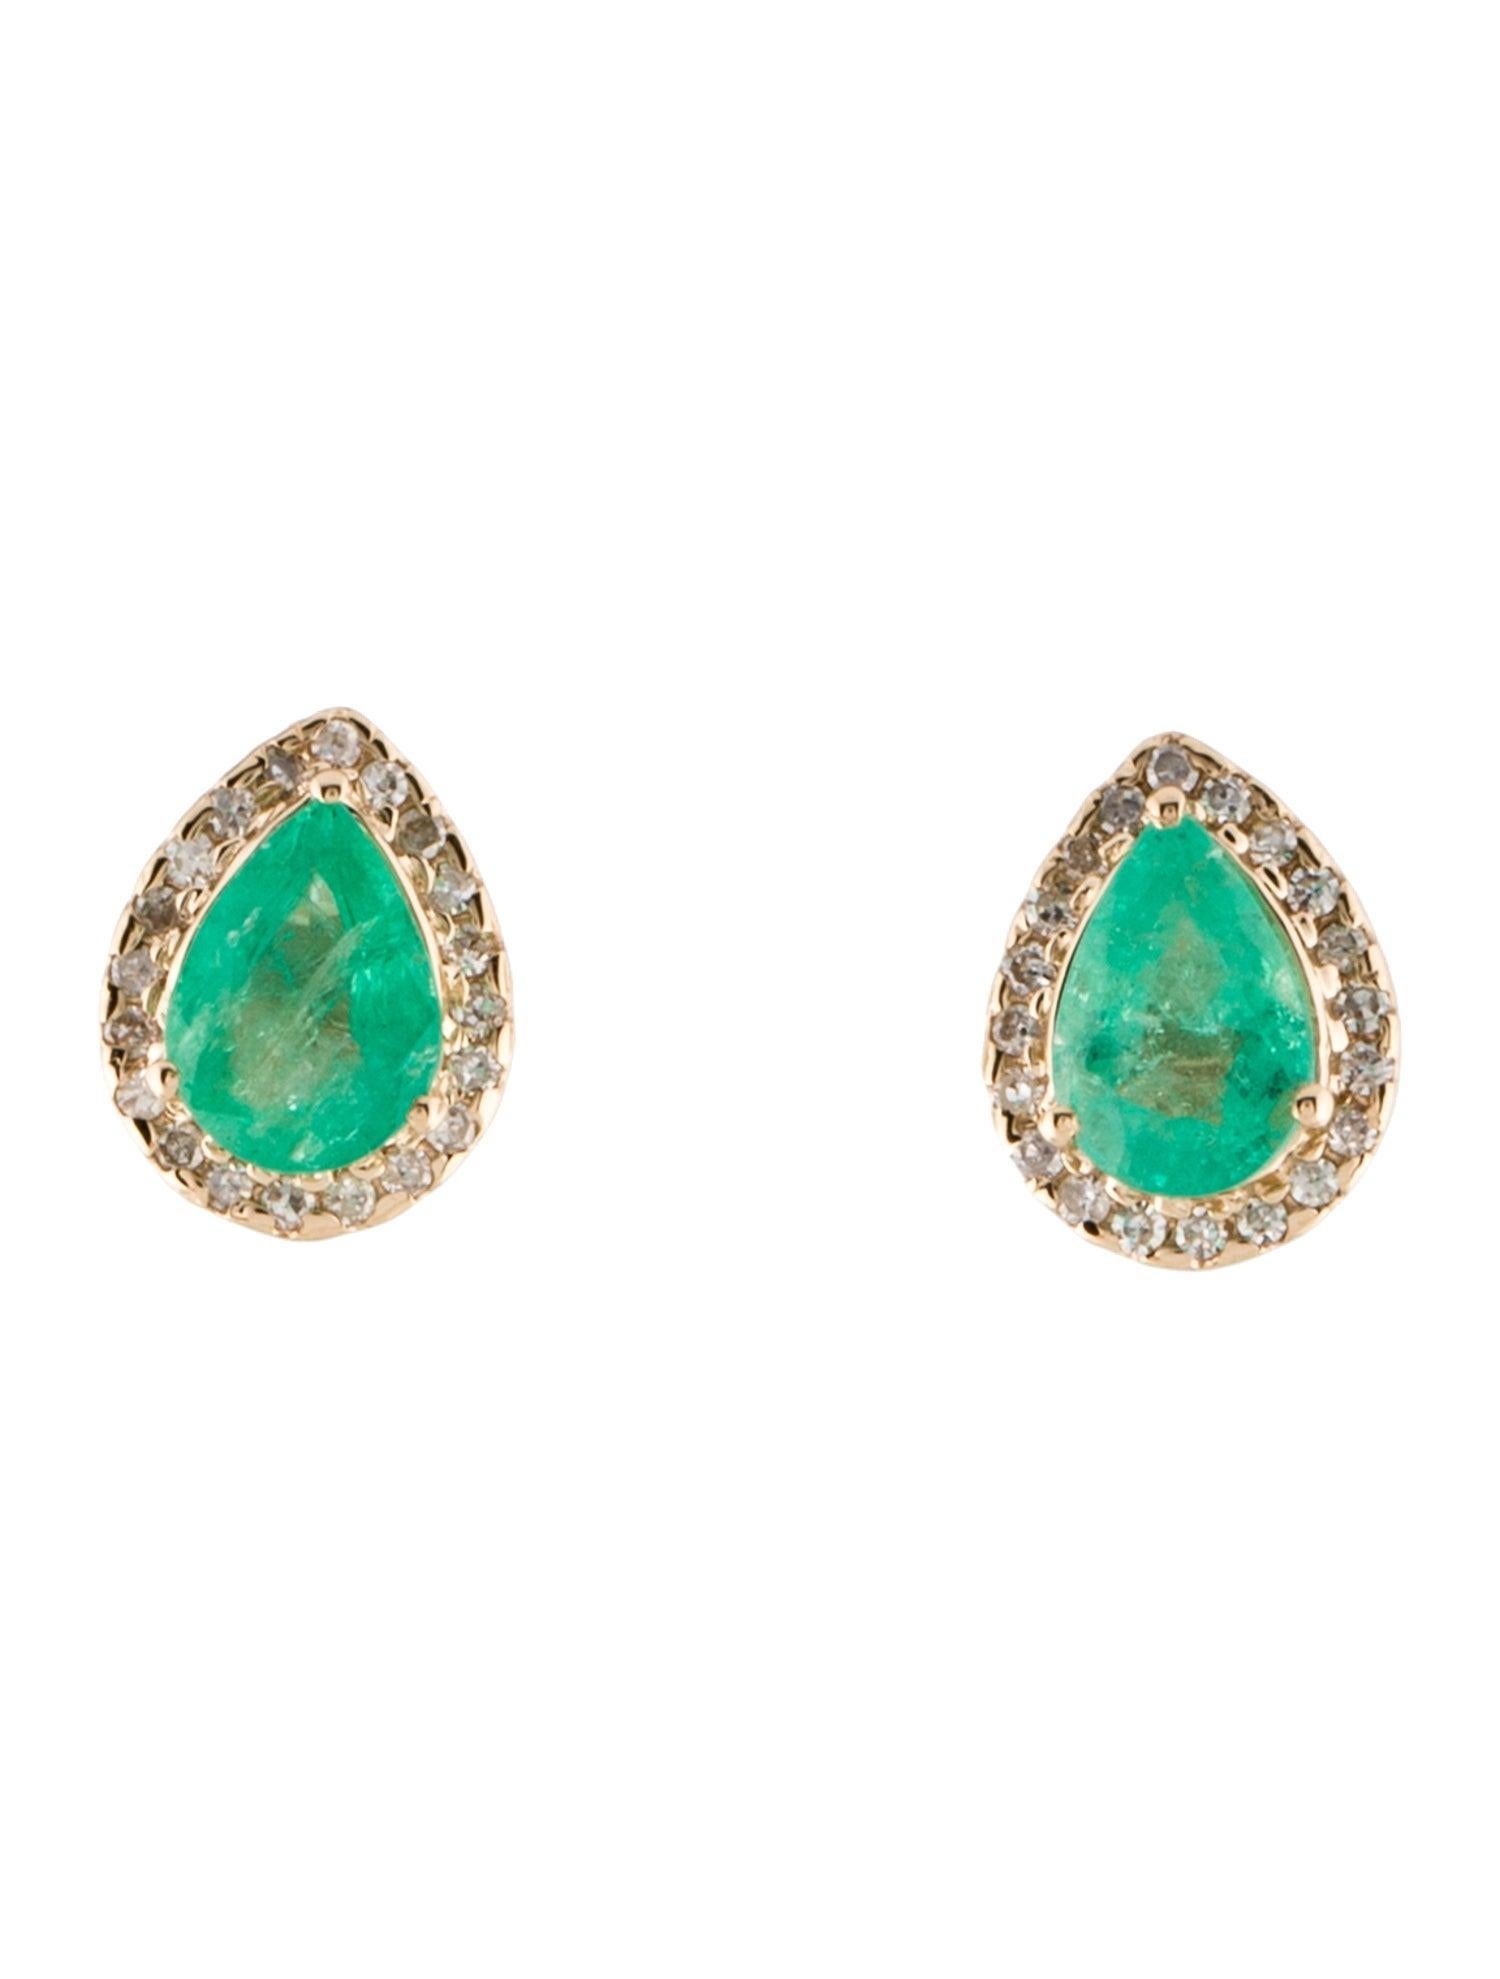 Discover the allure of these exquisite 14K Yellow Gold Stud Earrings, each featuring a stunning 1.30 carat faceted pear-shaped Emerald, complemented by a halo of forty near colorless, single-cut Diamonds totaling 0.18 carats. These earrings